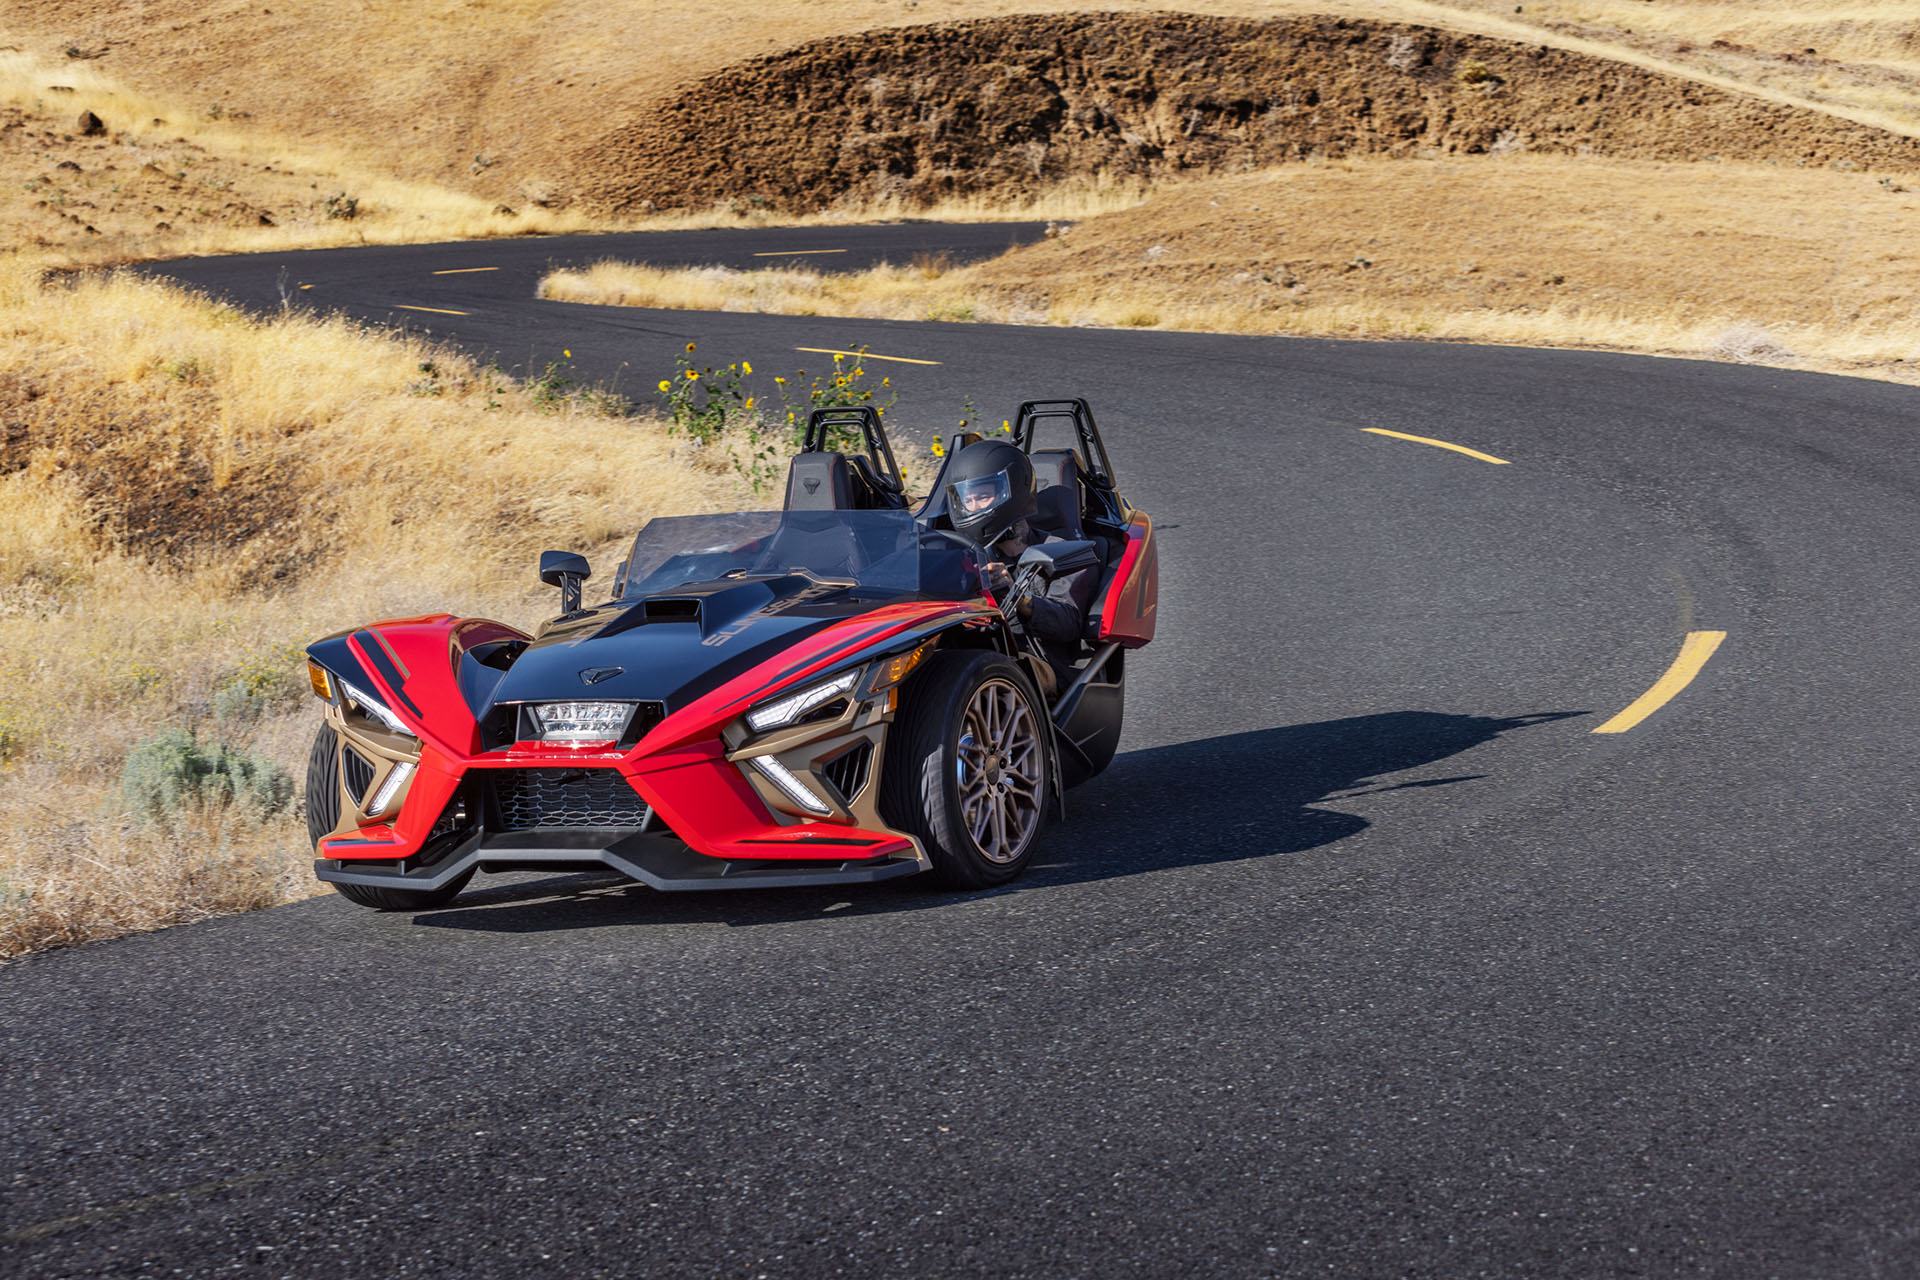 2022 Slingshot Signature Limited Edition in Saint Clairsville, Ohio - Photo 5